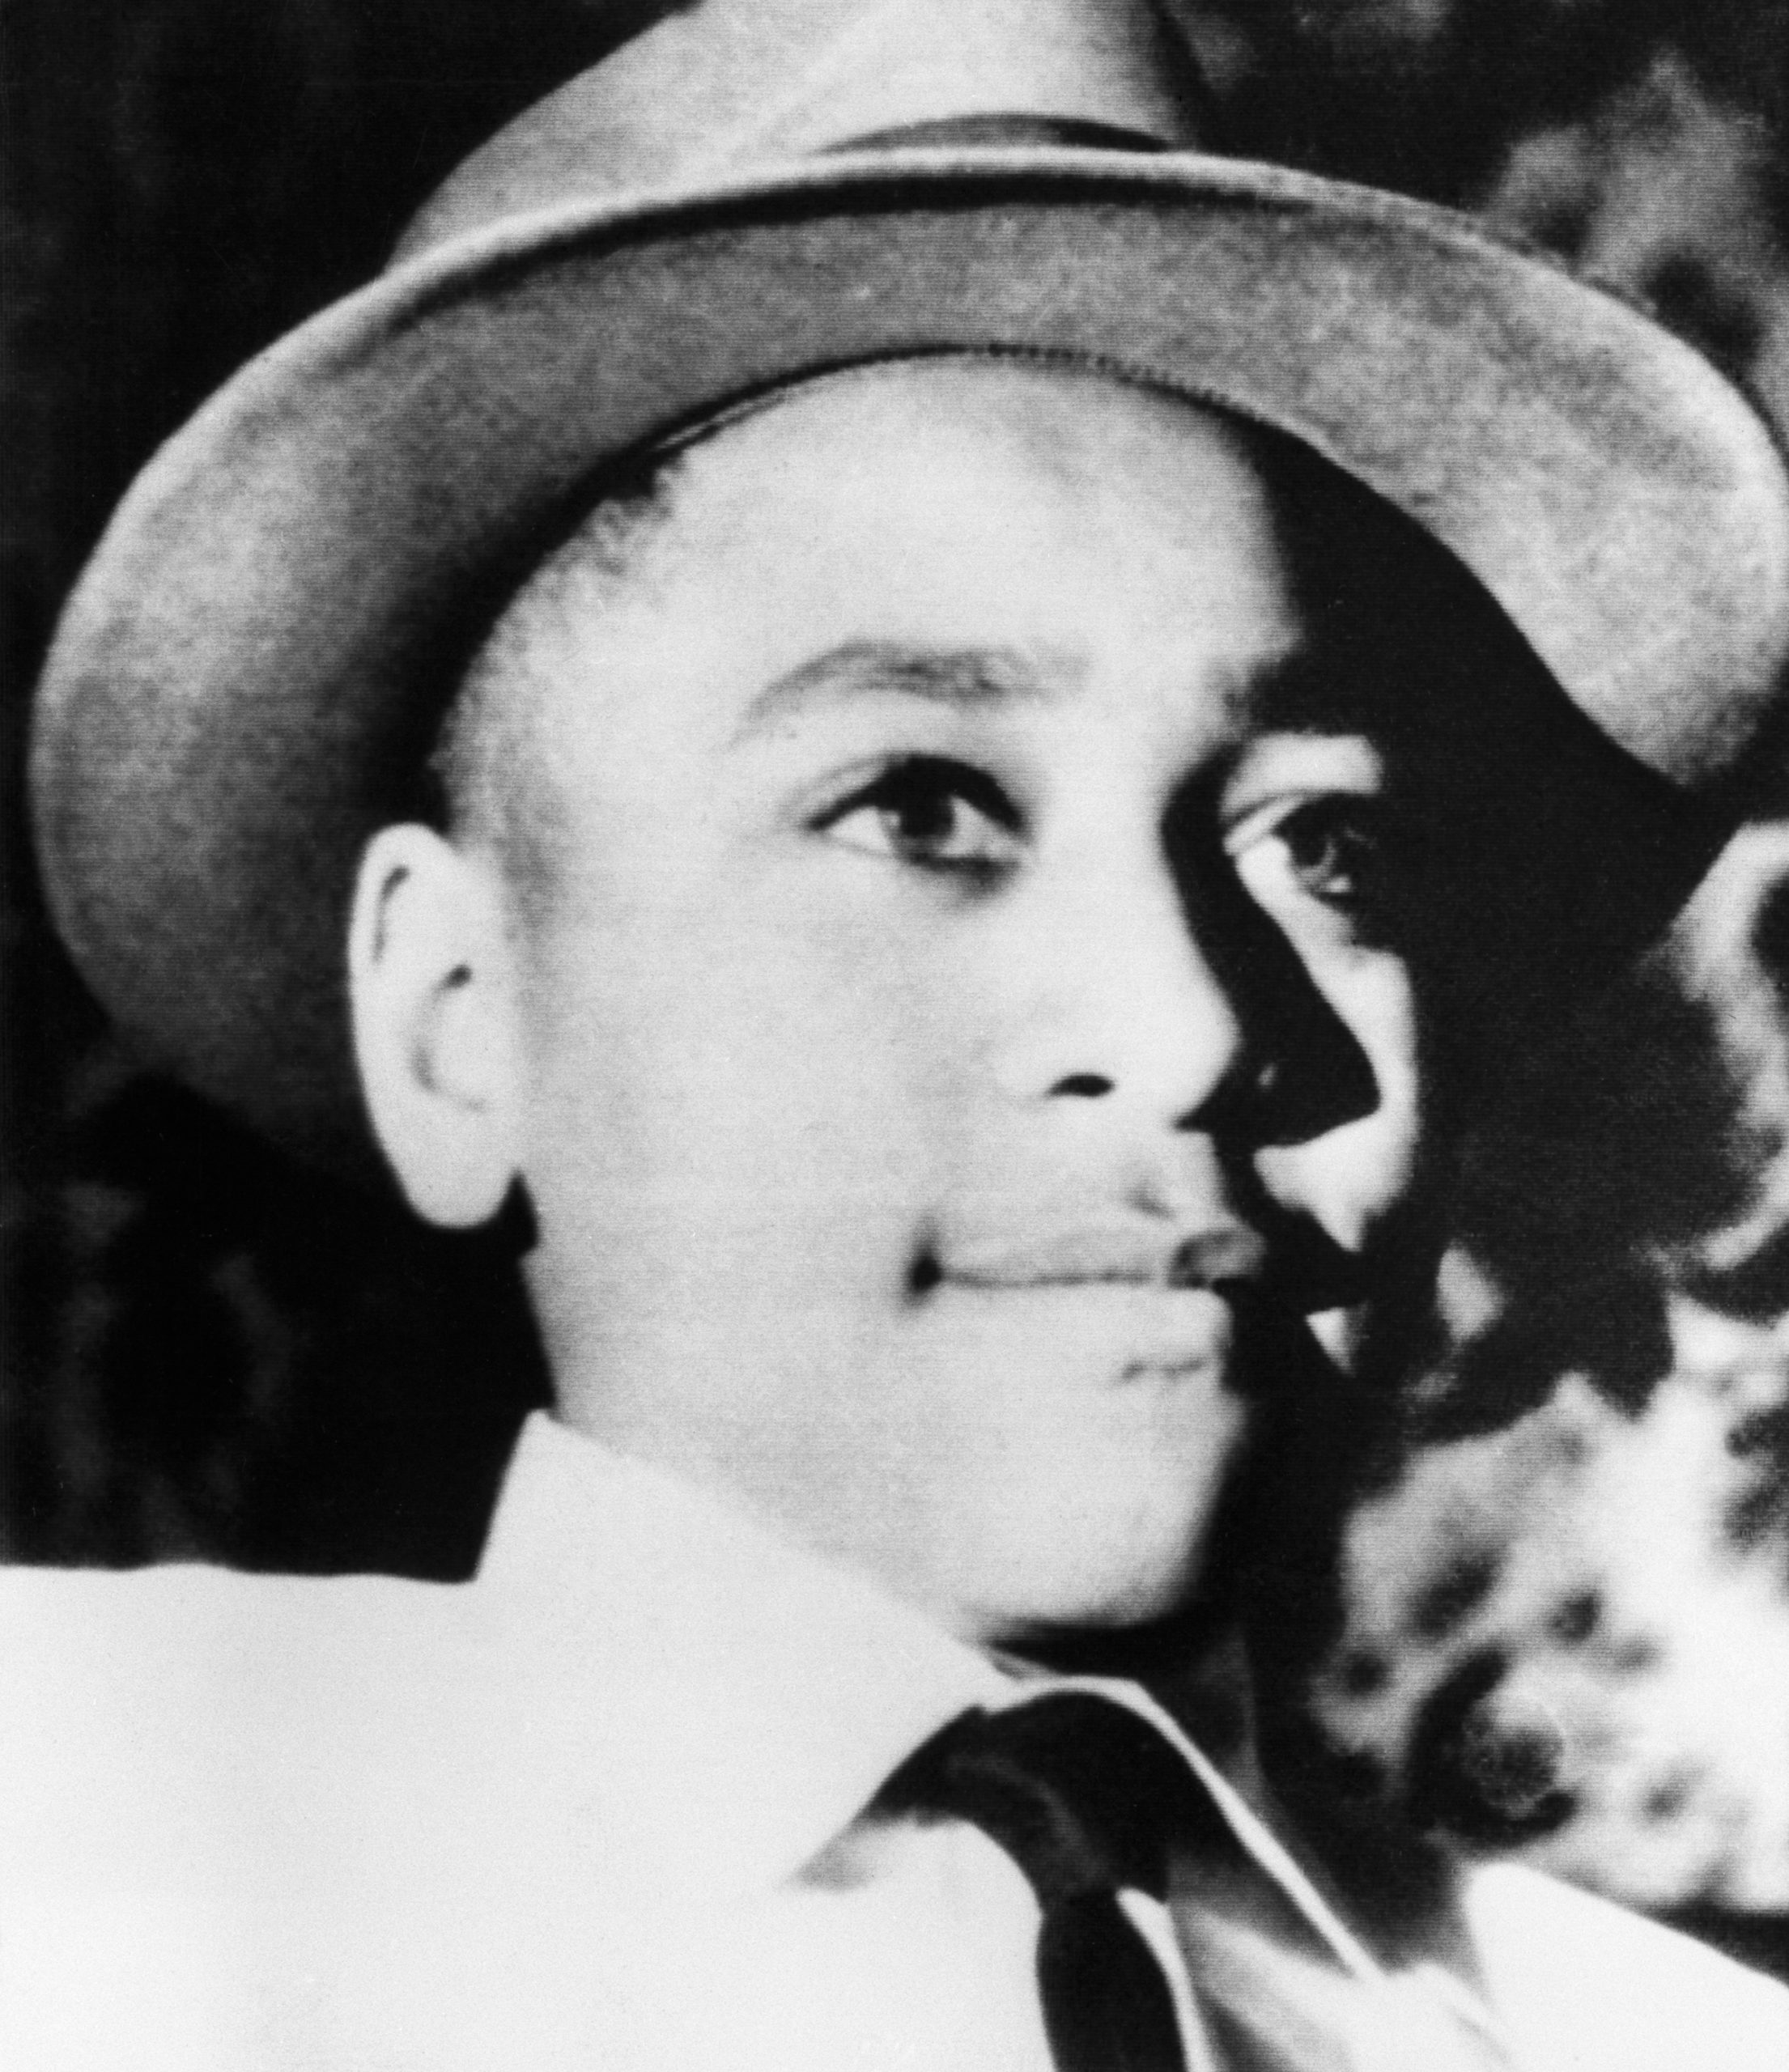 Emmett Till’s Murder Horrified 1960s America — and Continues to Shock Today